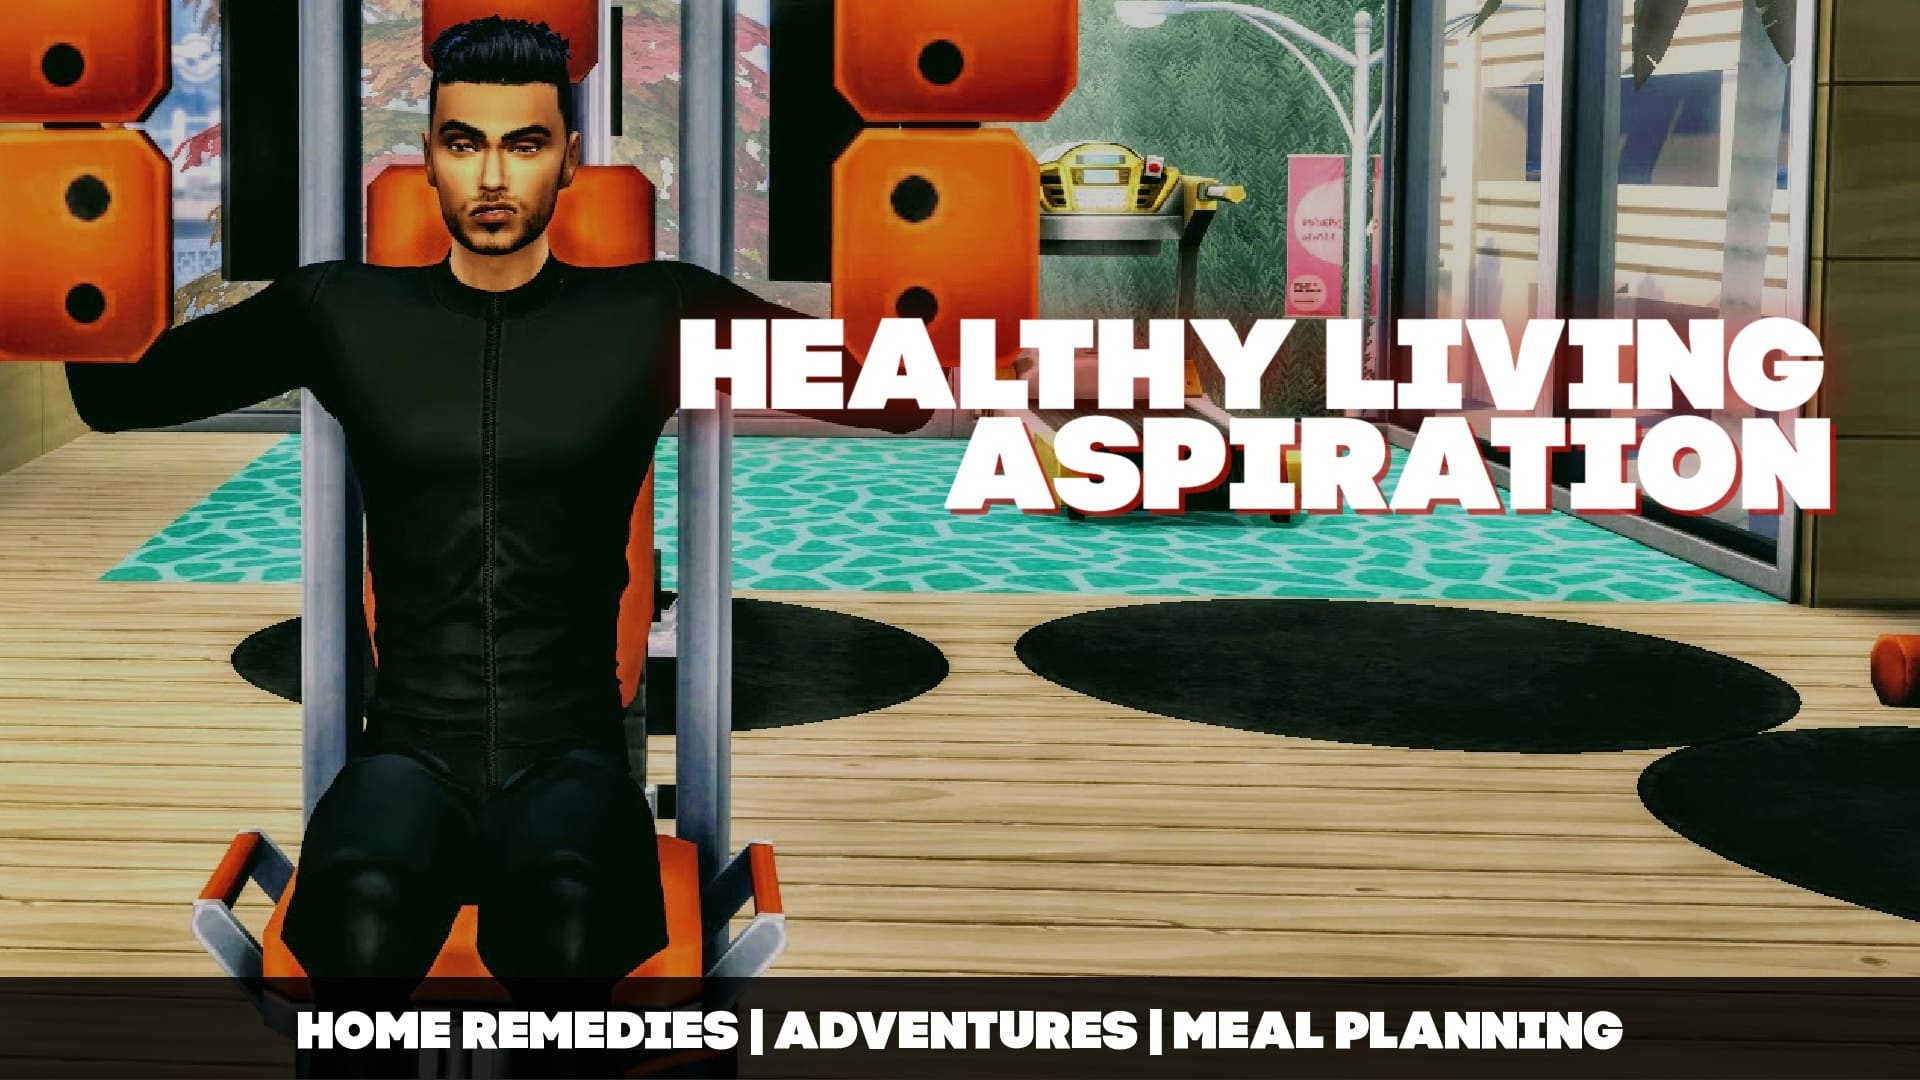 THE SIMS 4 HEALTHY LIVING ASPIRATION MOD